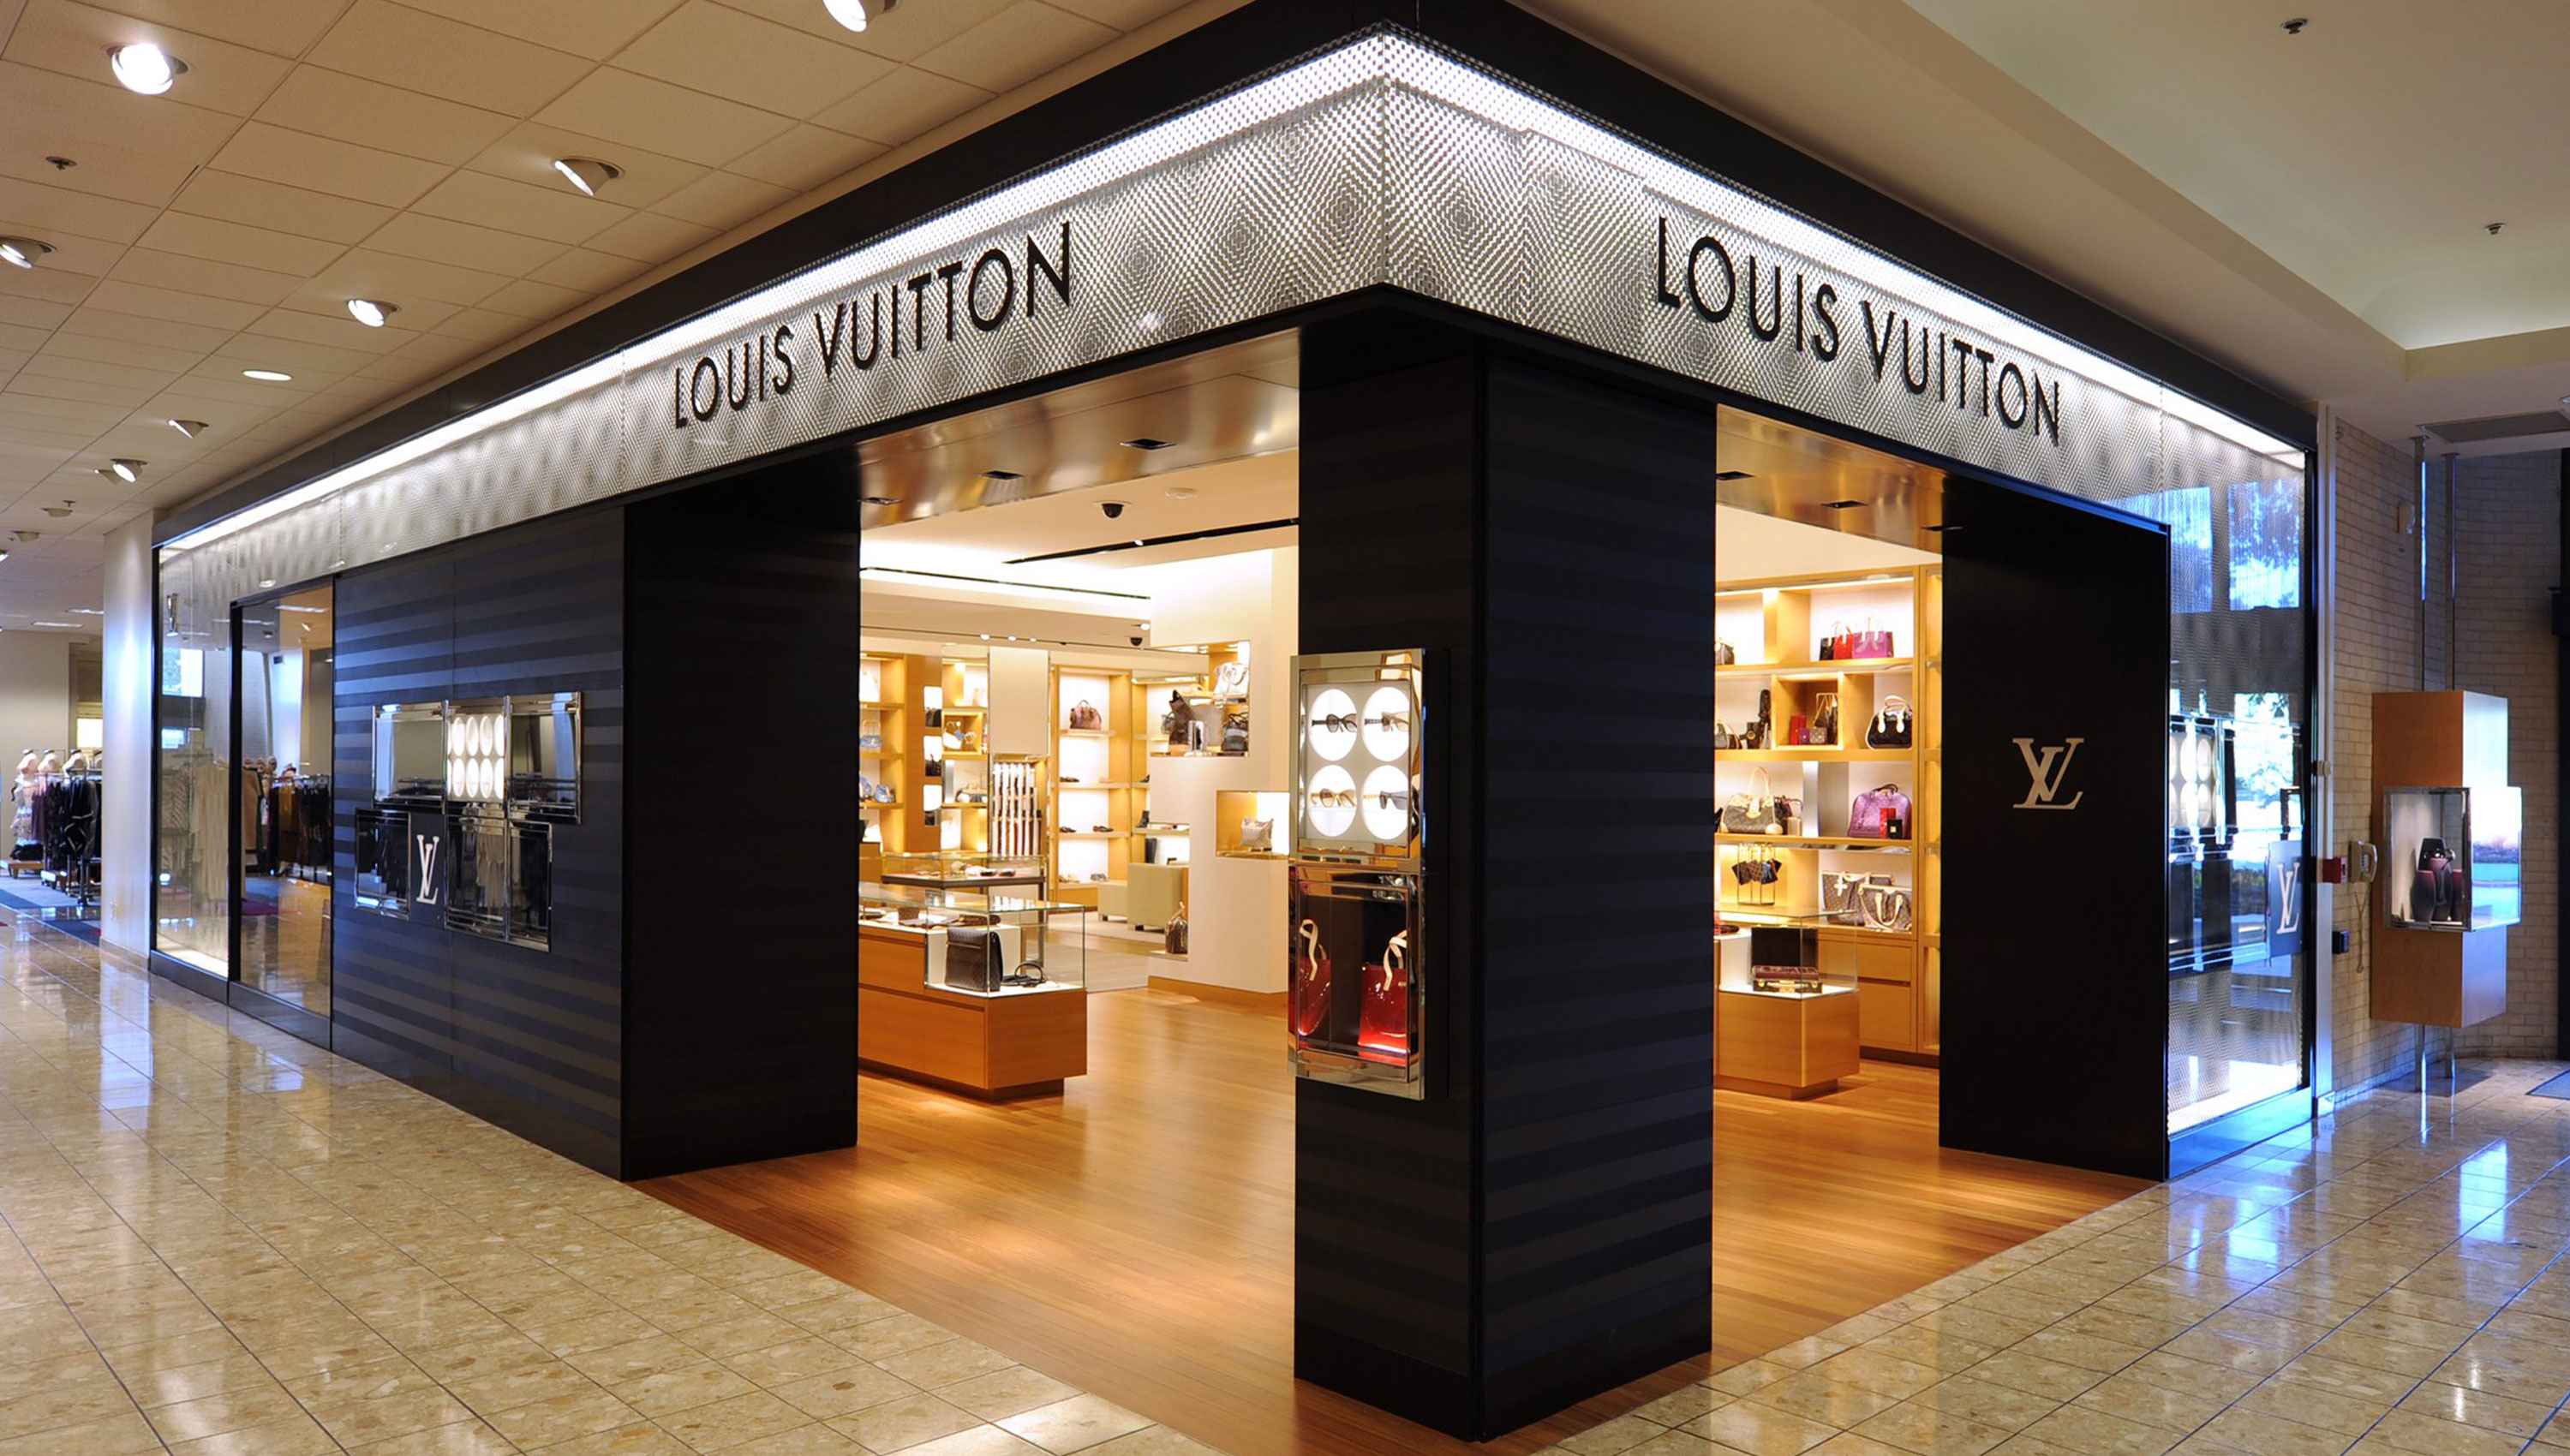 Louis Vuitton Coupons near me in Dallas, TX 75225 | 8coupons